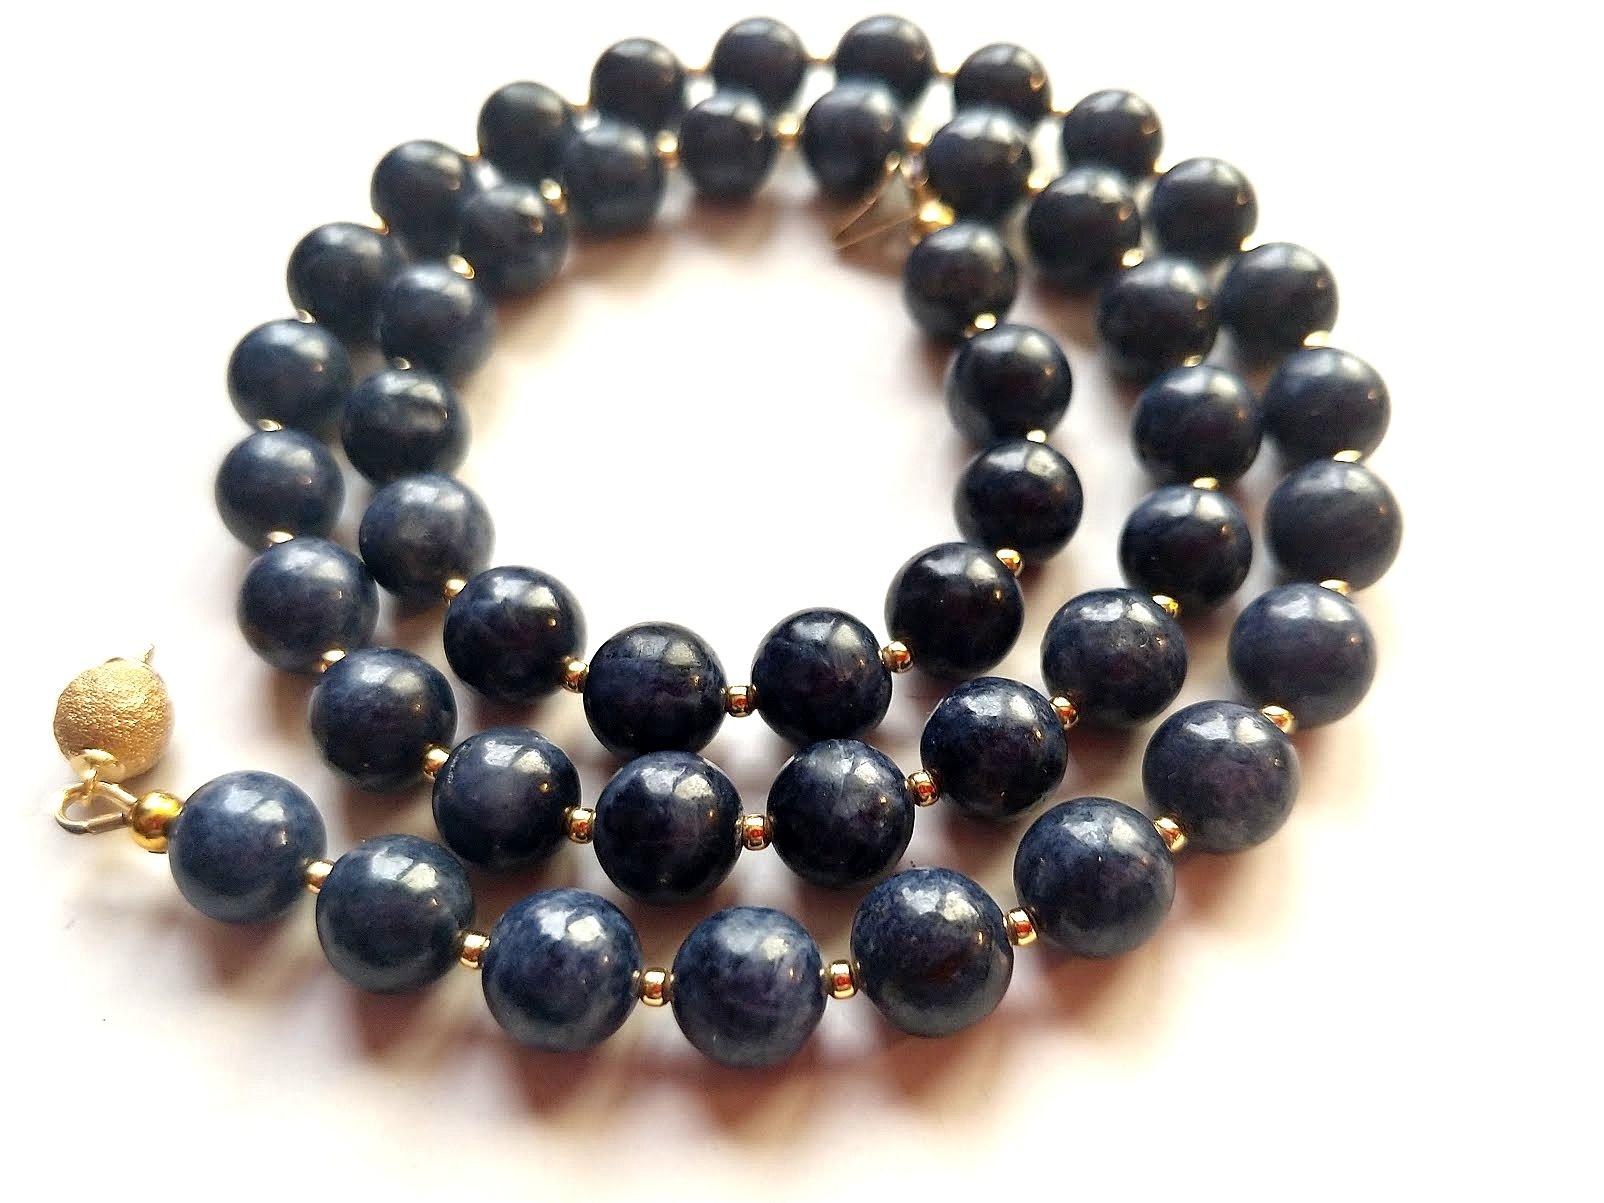 Discover our exquisite blue sapphire necklace, mined in Myanmar (Burma). This necklace is crafted from high-quality, genuine, natural, opaque blue sapphire beads, which are not treated in any way.
The necklace features smooth round beads measuring